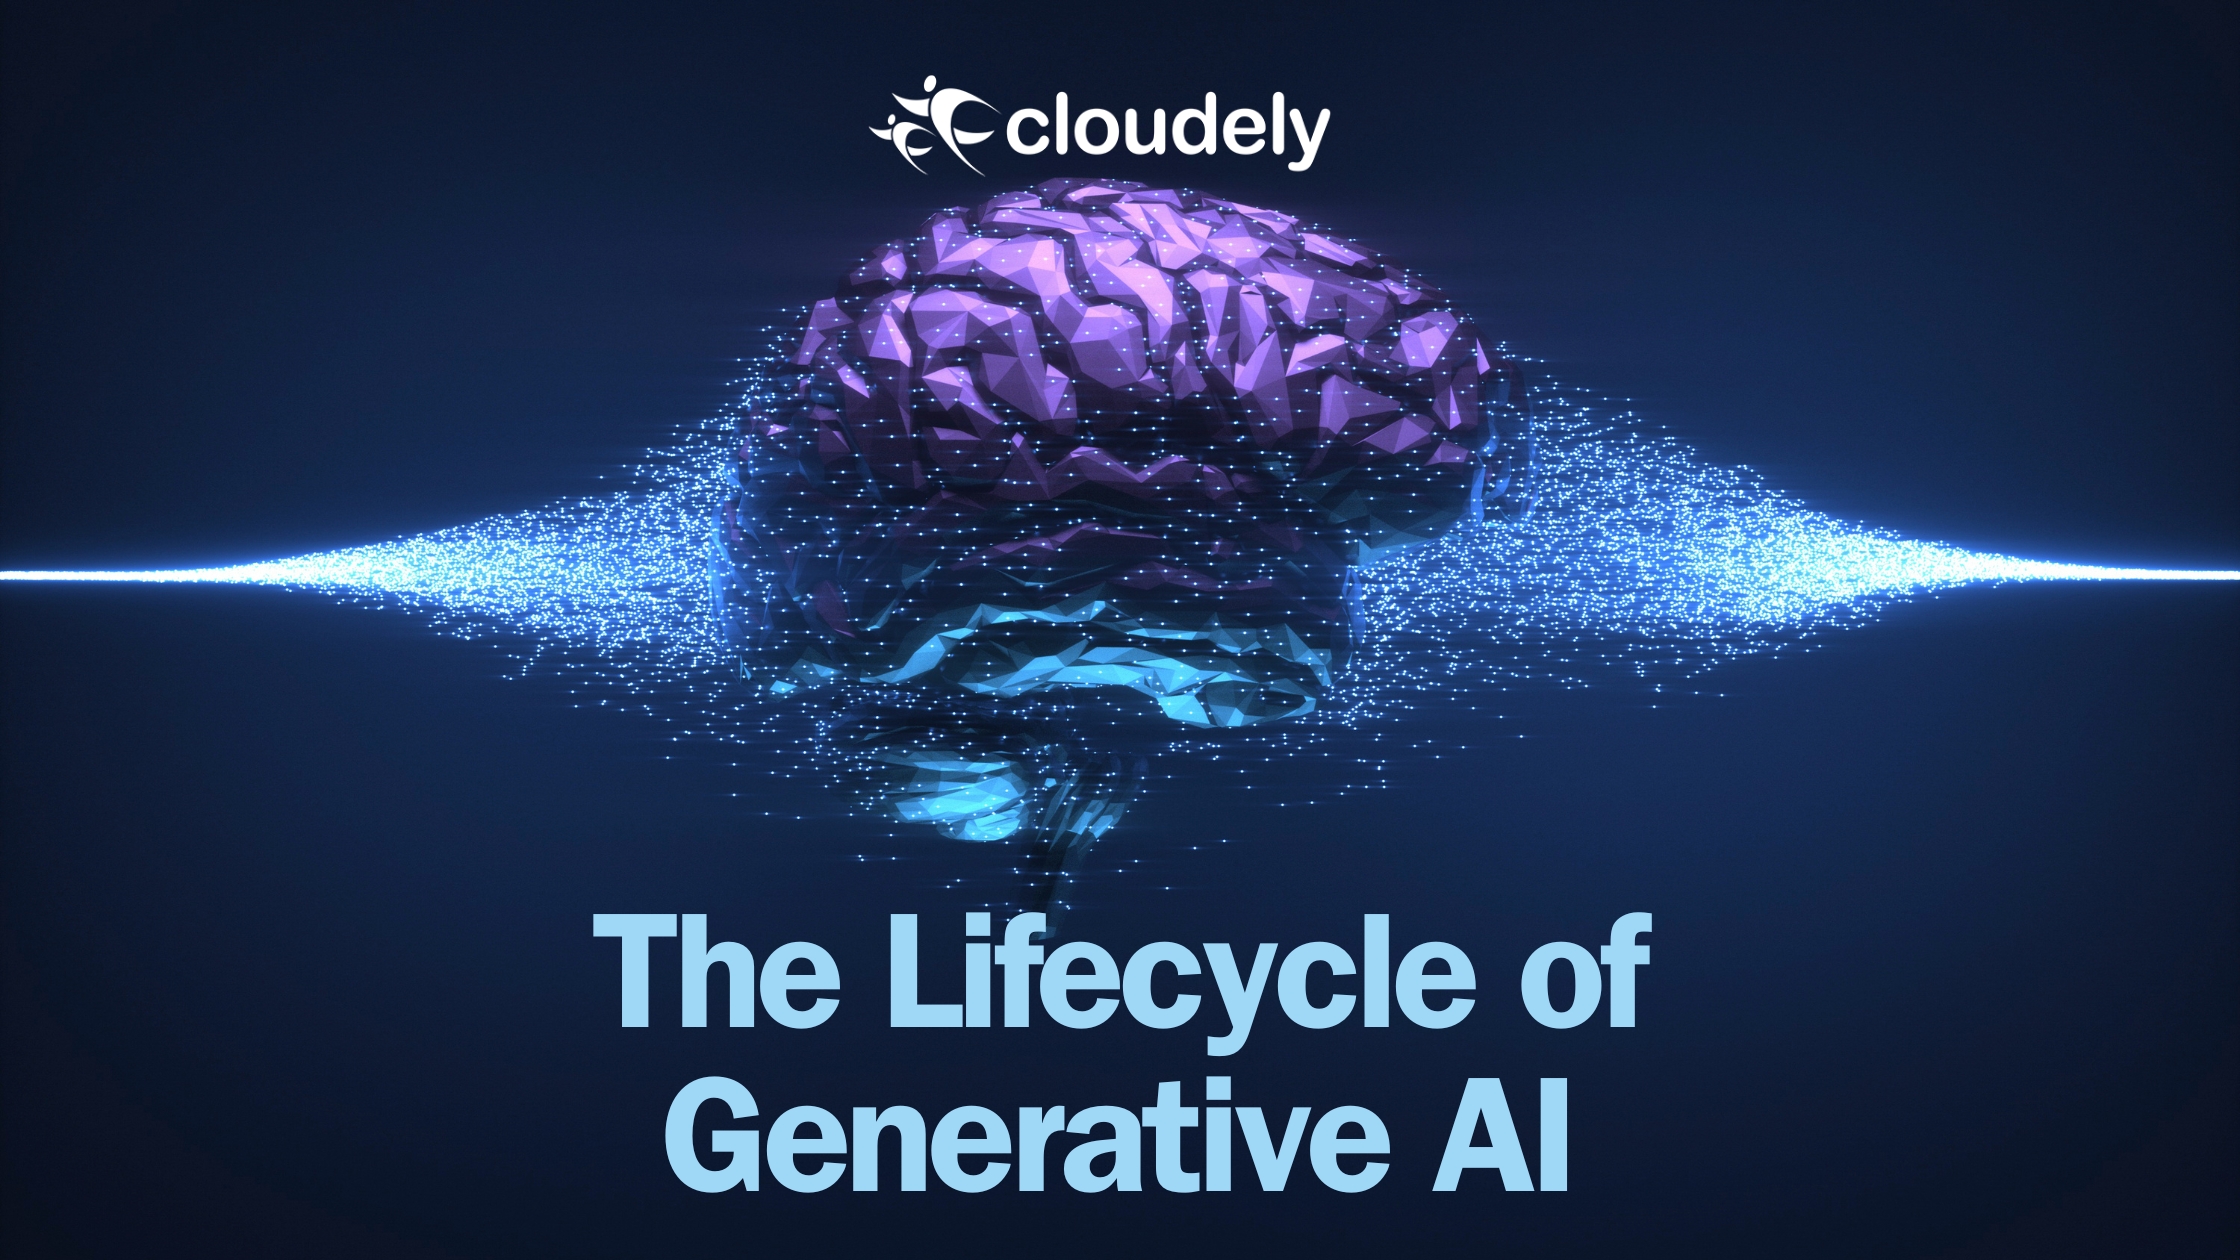 lifecycle of generative AI